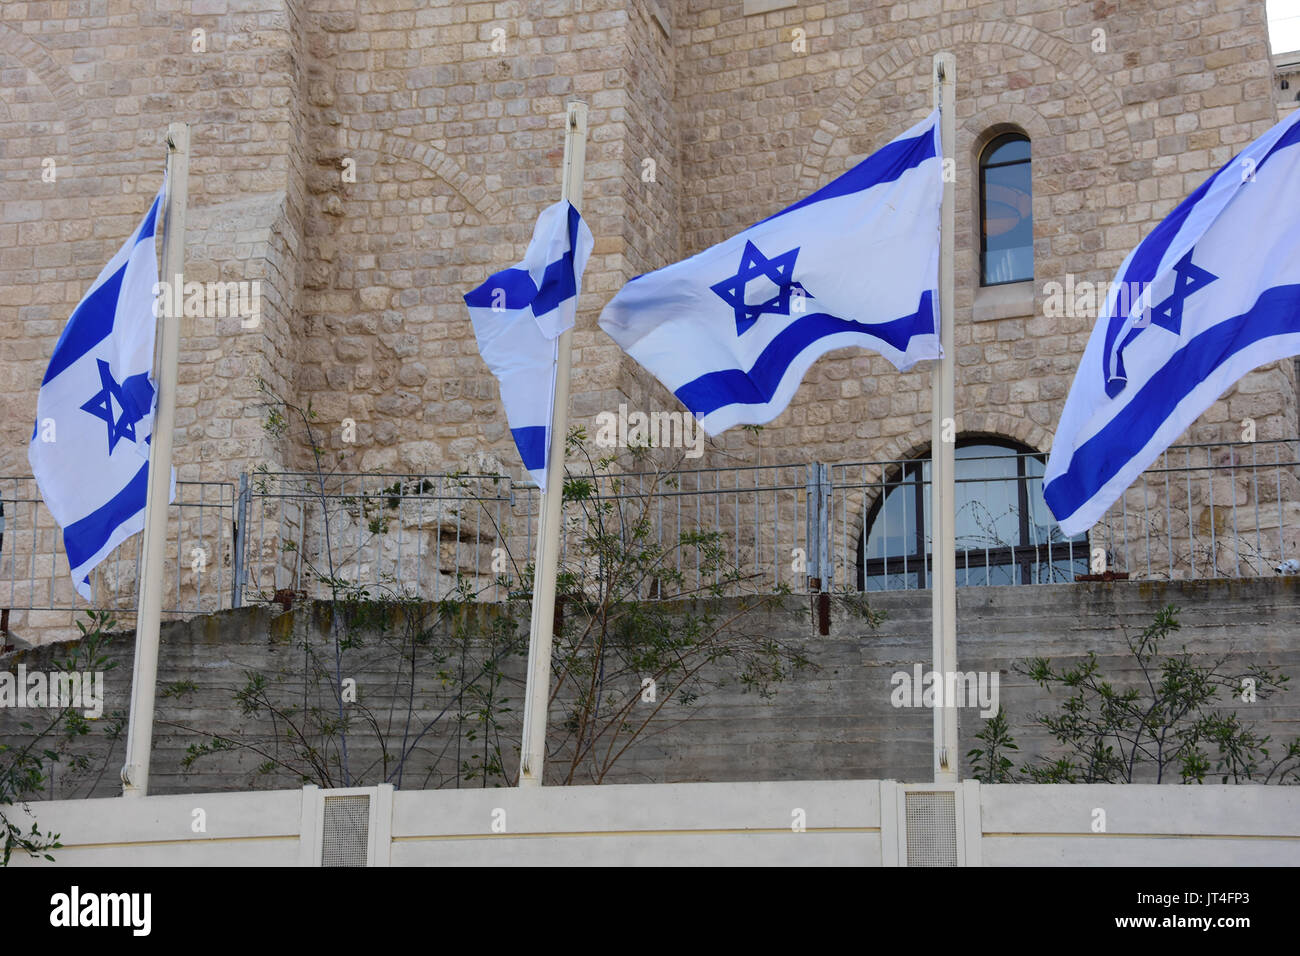 Flags of Israel Stock Photo